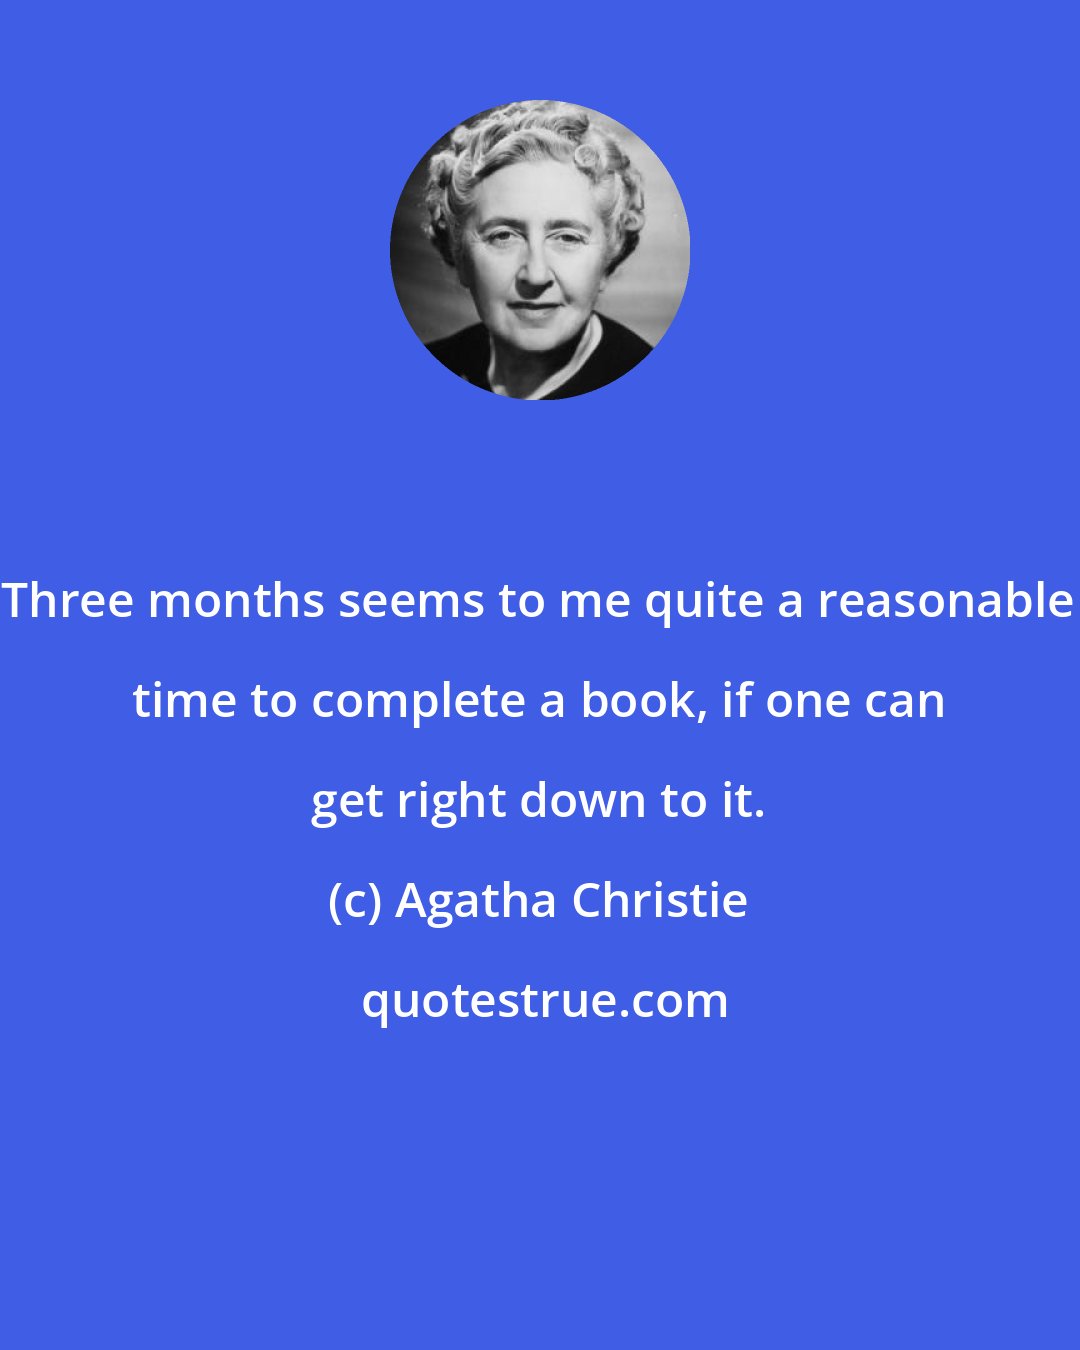 Agatha Christie: Three months seems to me quite a reasonable time to complete a book, if one can get right down to it.